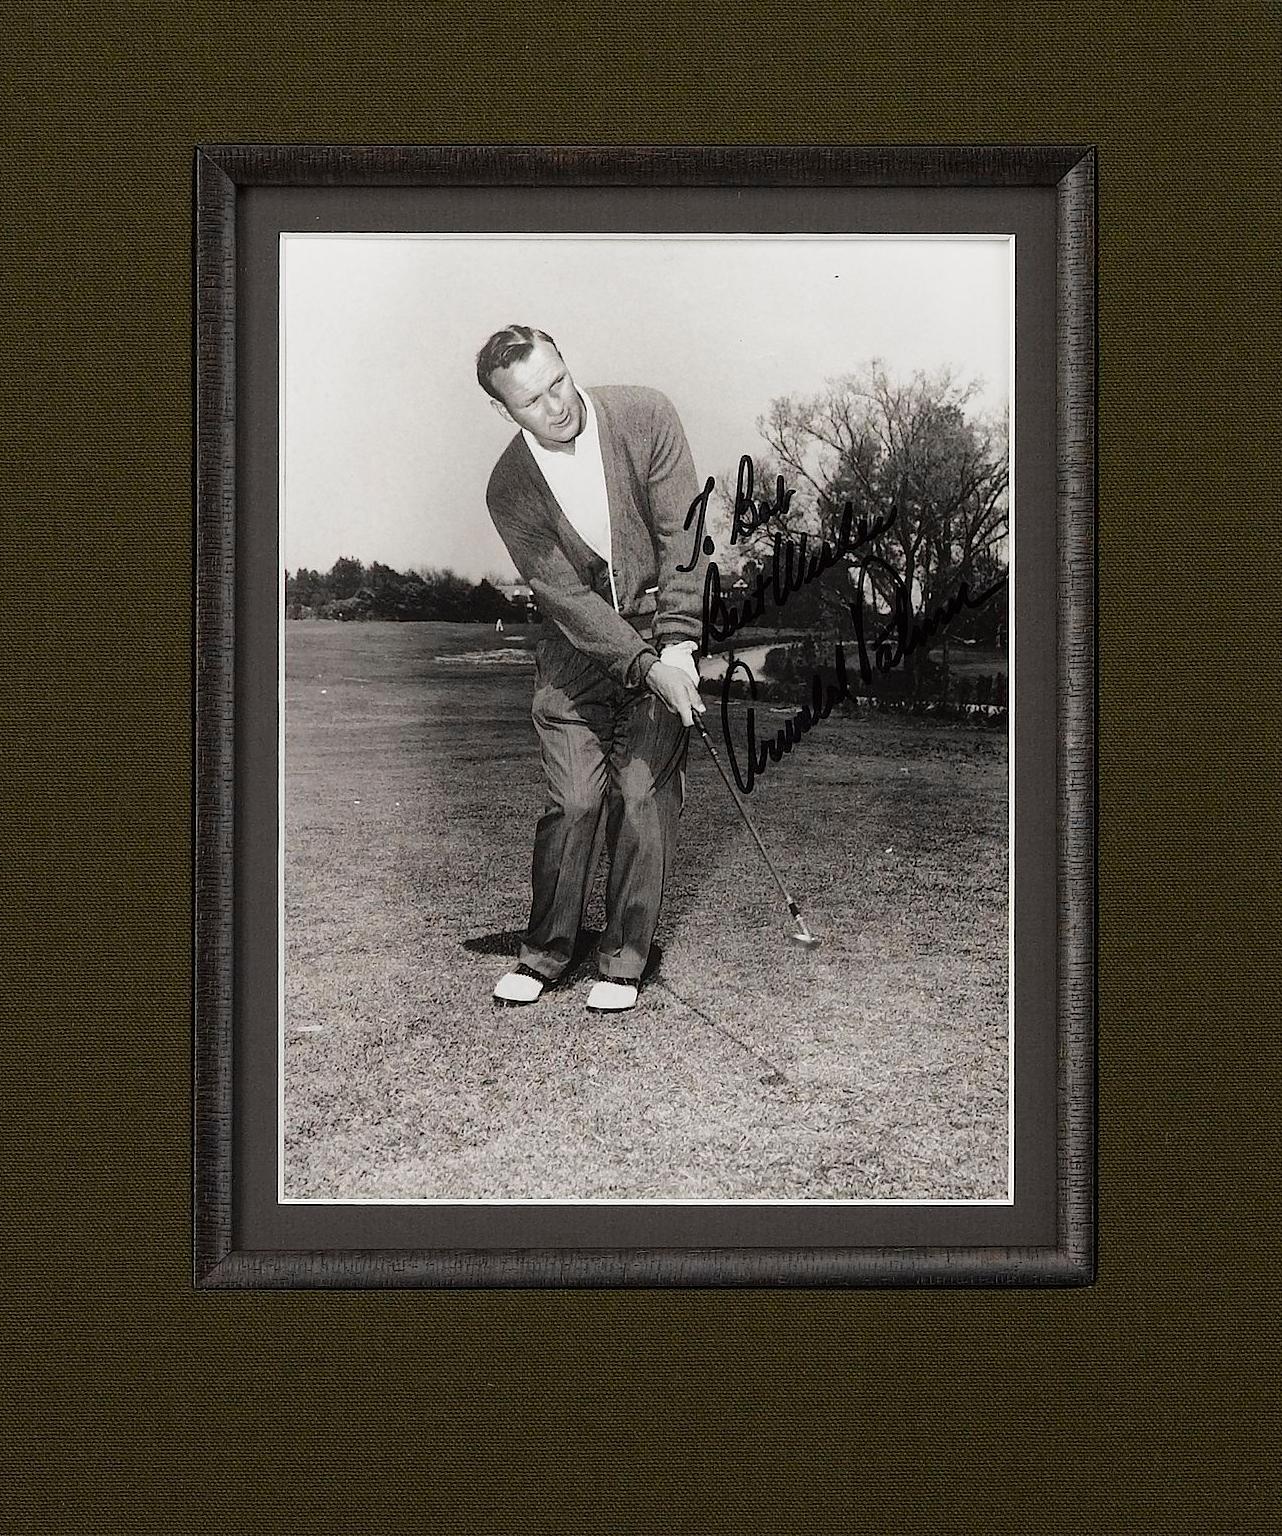 The most celebrated golfers of the 20th century are captured together in this magnificent one-of-a-kind golf signature collectible collage. Presented are the authentic signatures of Arnold Palmer, Jack Nicklaus, Ben Hogan, Gene Sarazen, Byron